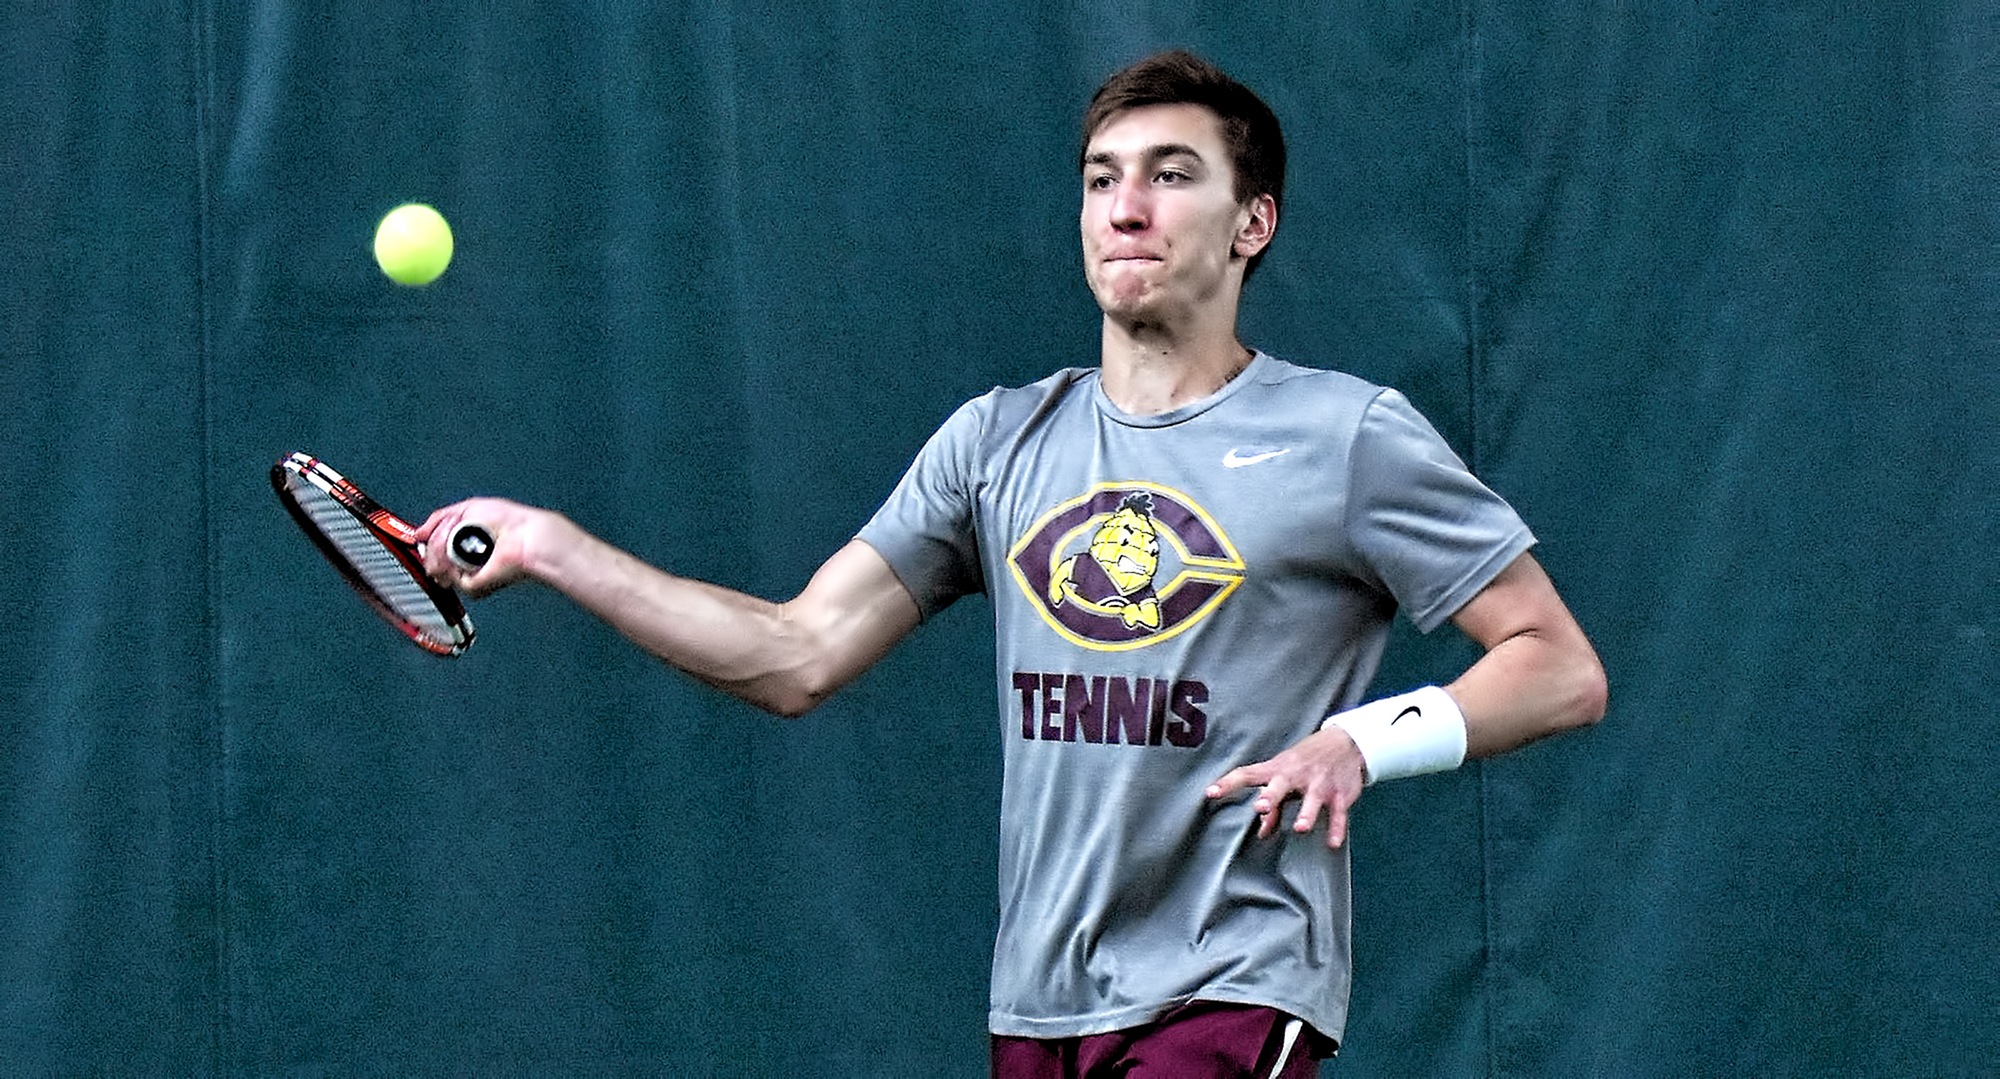 Junior Carter Steffes clinched the Cobbers' 5-4 win at St. Mary's with his 4-6, 6-4, 10-5 win at No.5 singles.